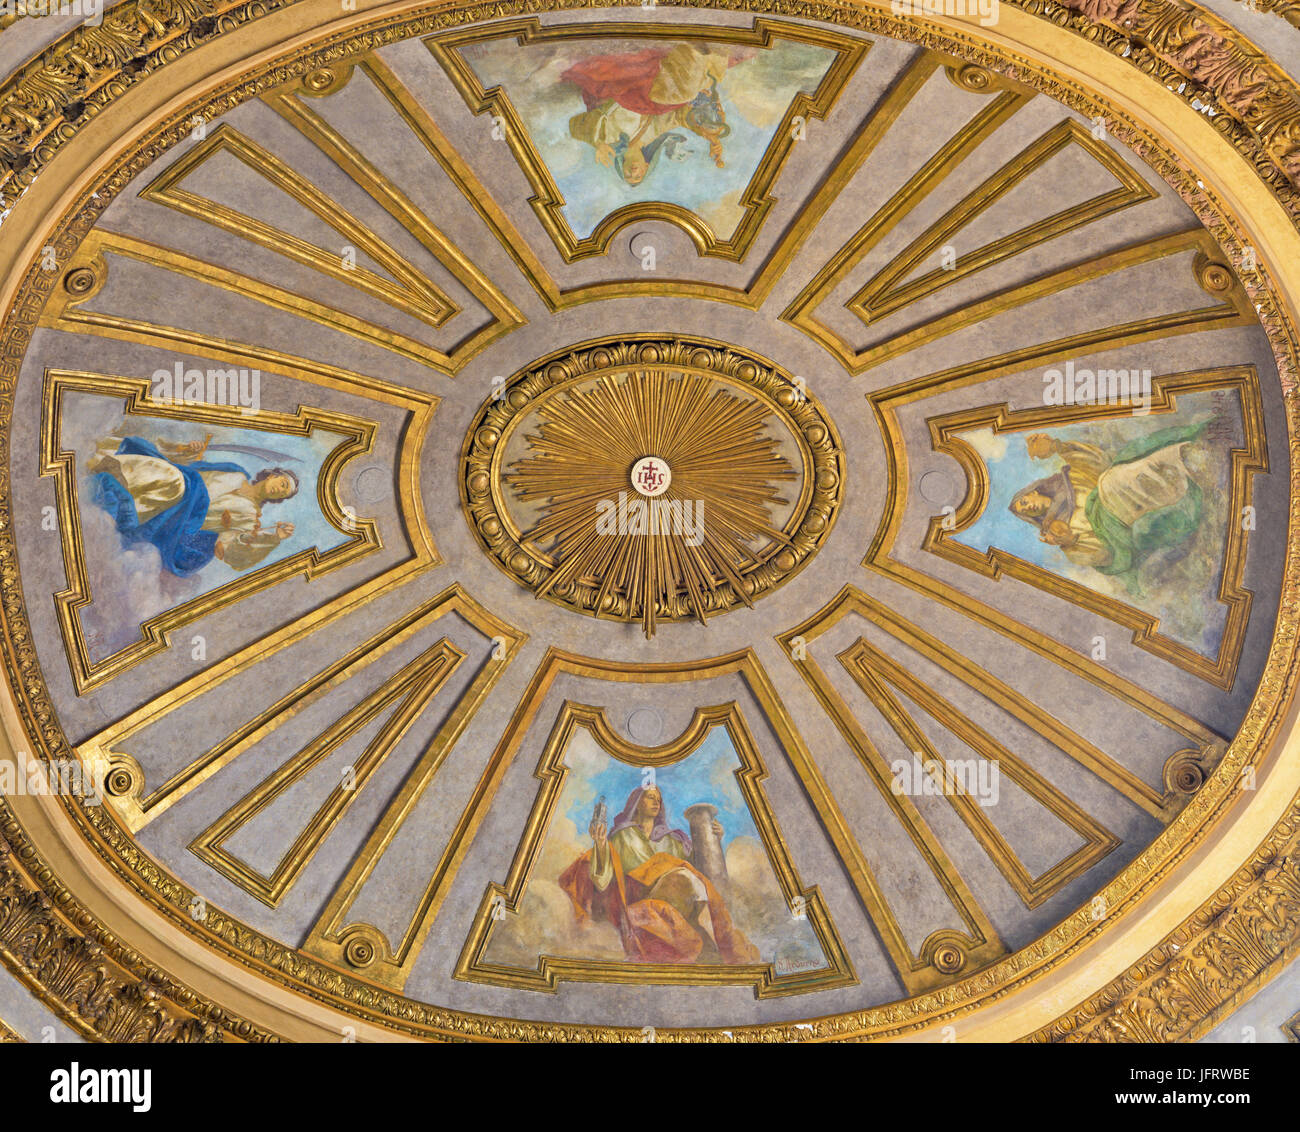 TURIN, ITALY - MARCH 14, 2017: The cupola with the fresco of virtues in church Basilica del Corpus Christi by Nicola Arduino (1948). Stock Photo